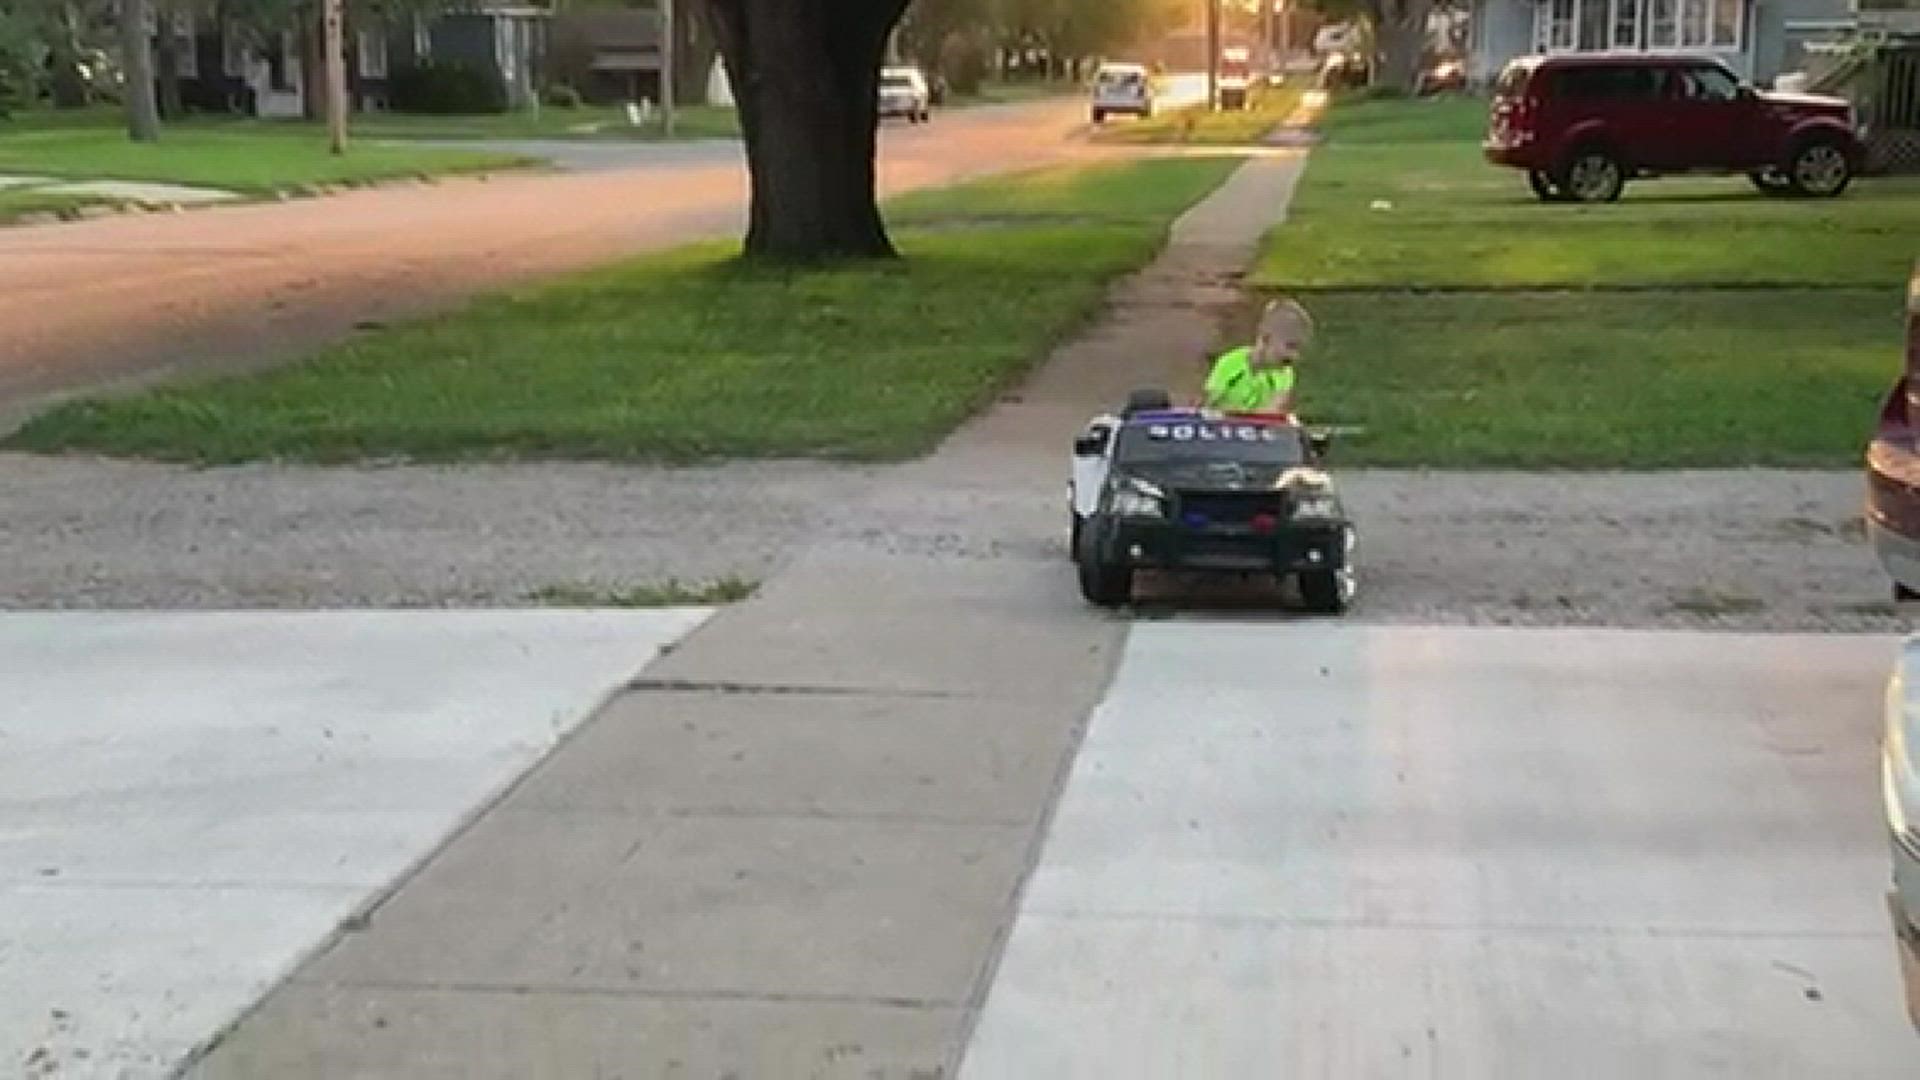 Five-year-old Tucker Garrels has been helping Nevada police patrol the sidewalks—so the officers returned the favor.